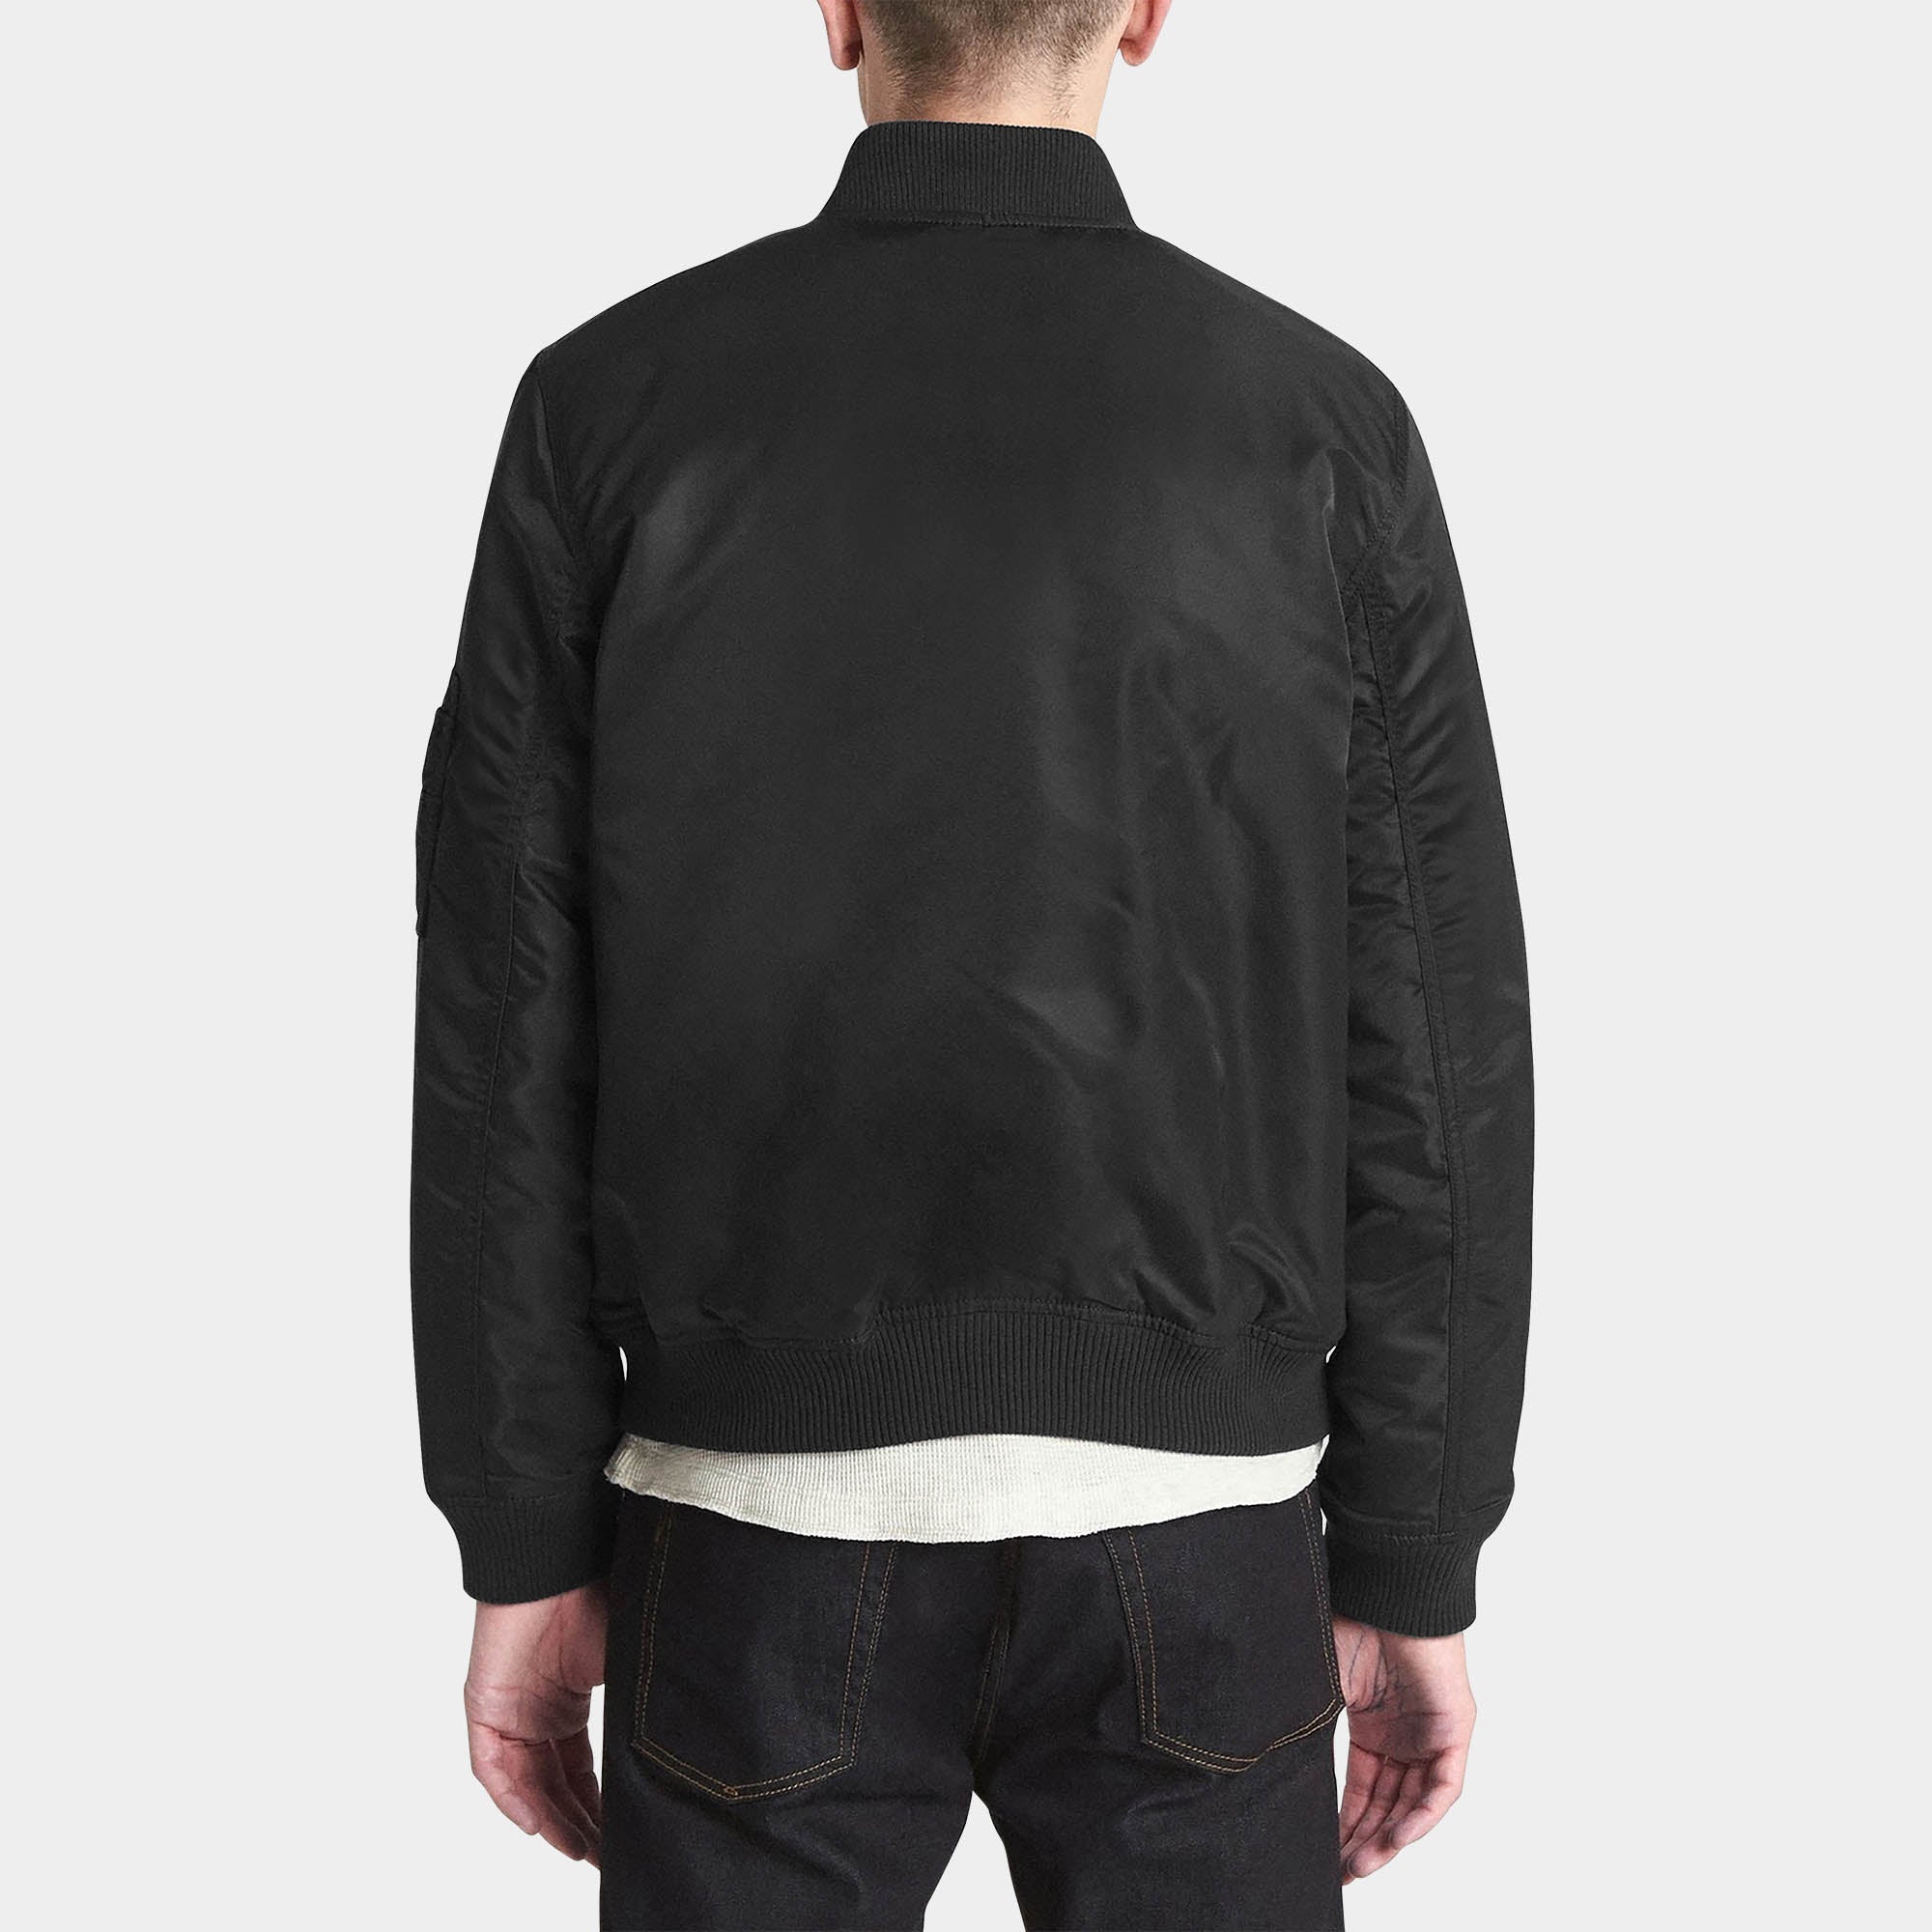 Men's Bomber Jacket - Jackets & Outerwear | Hat and Beyond